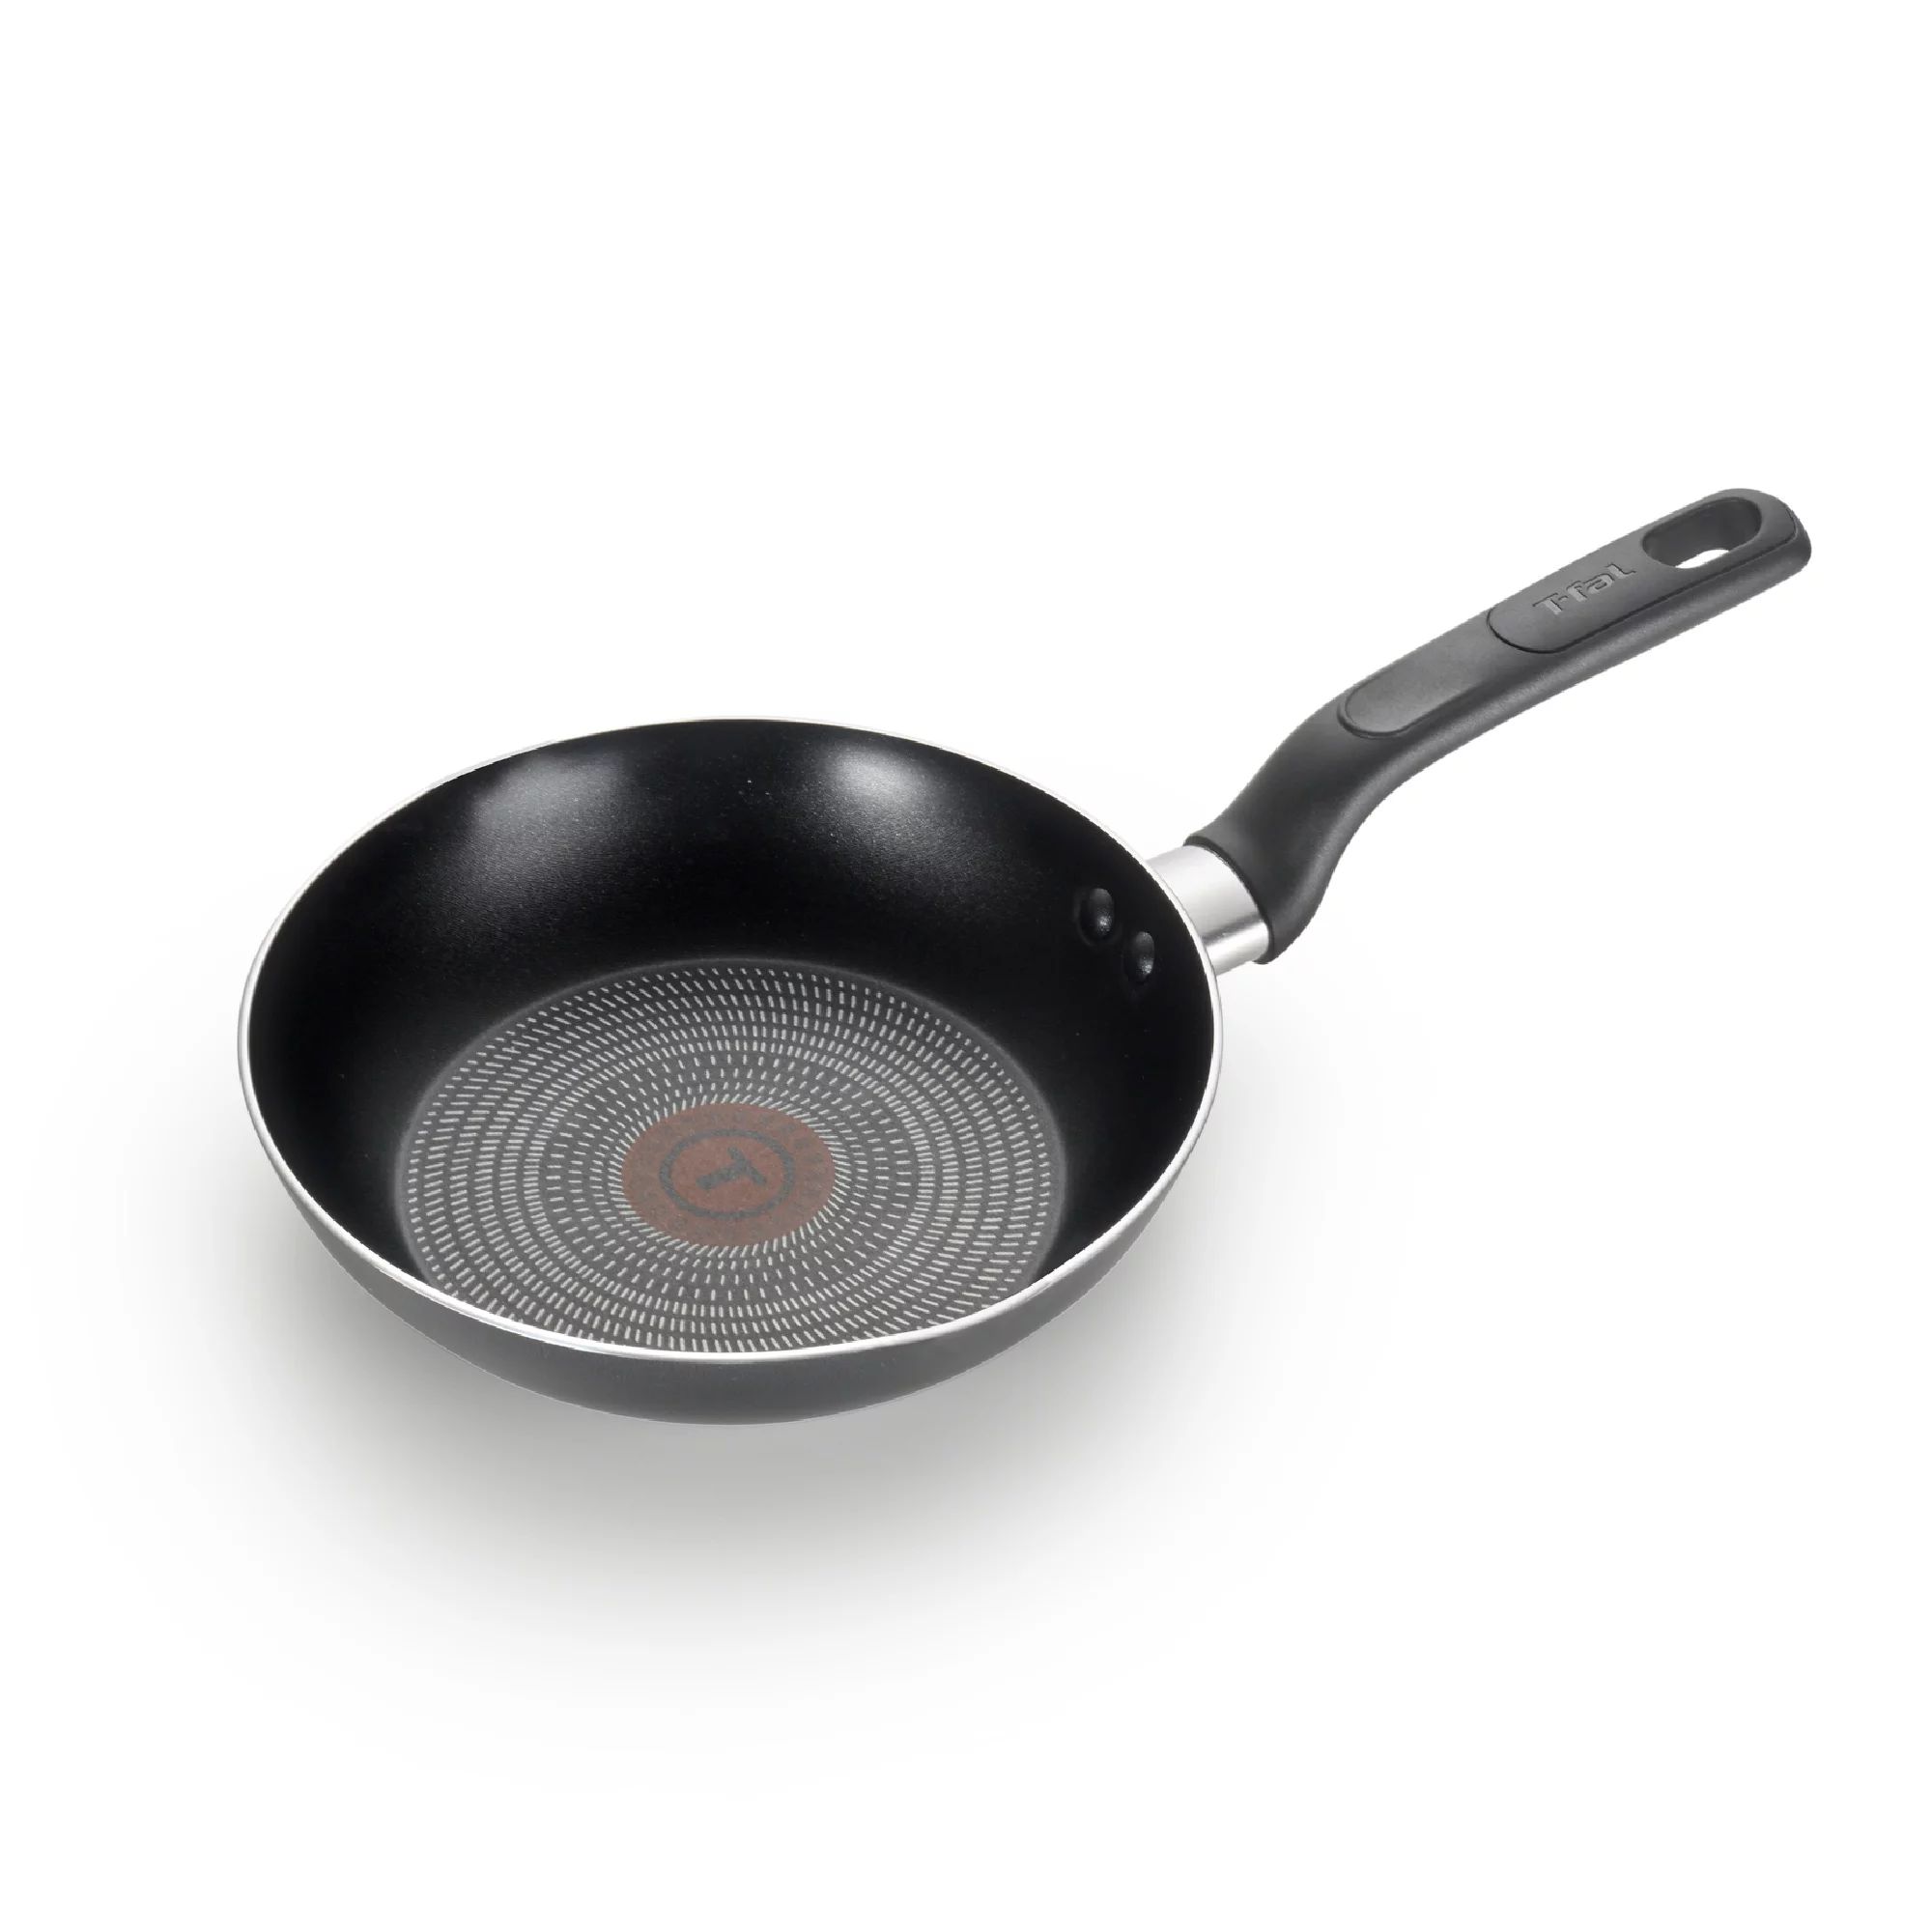 T-fal Easy Care Nonstick 10.5 inch Fry Pan, Grey | Walmart (US)